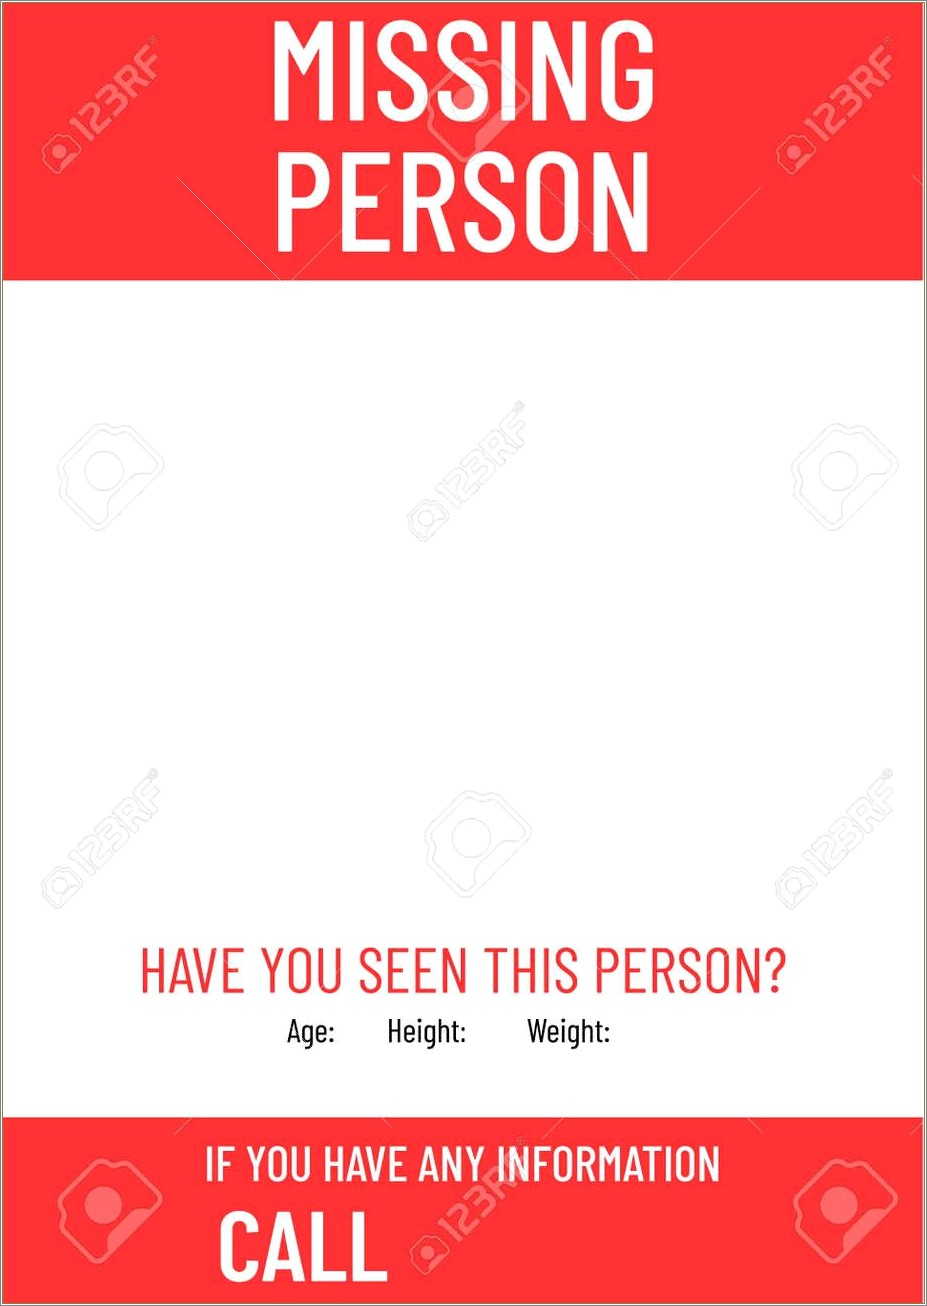 Free To Use Missing Person Flyer Template